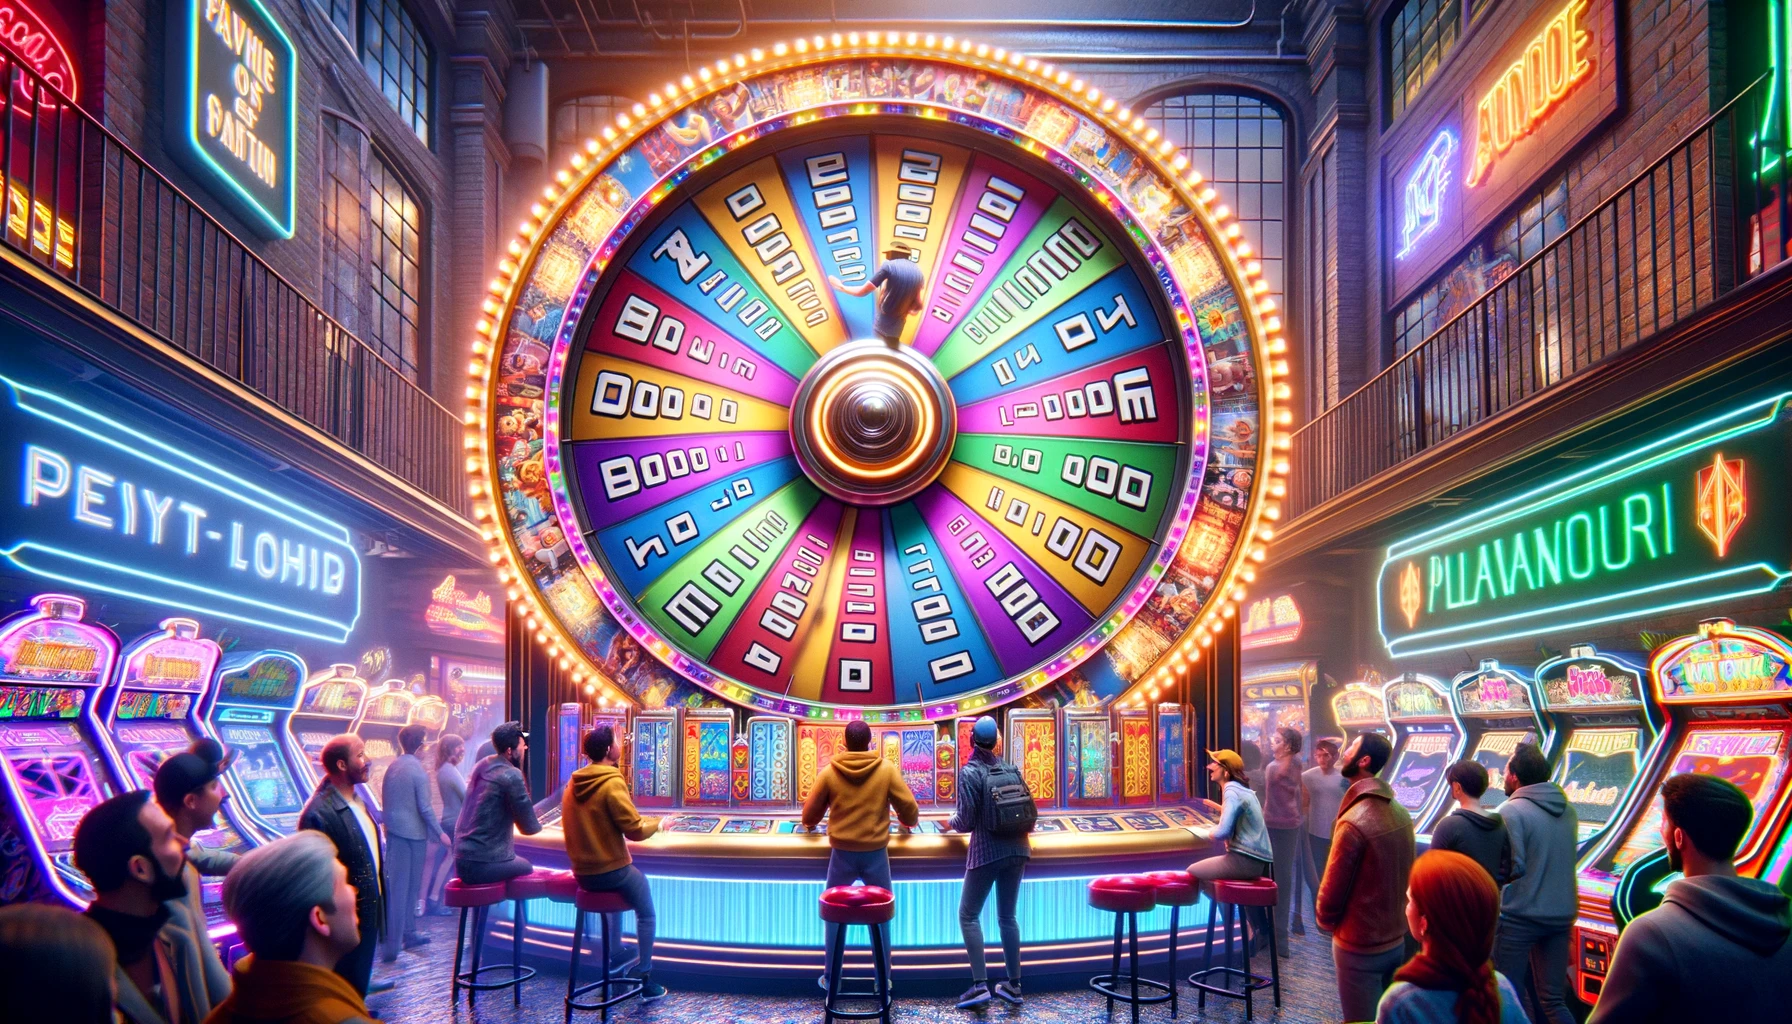 Best Price Arcade Wheel For Sale|Factory Redemption Arcade Ticket Games Made In China